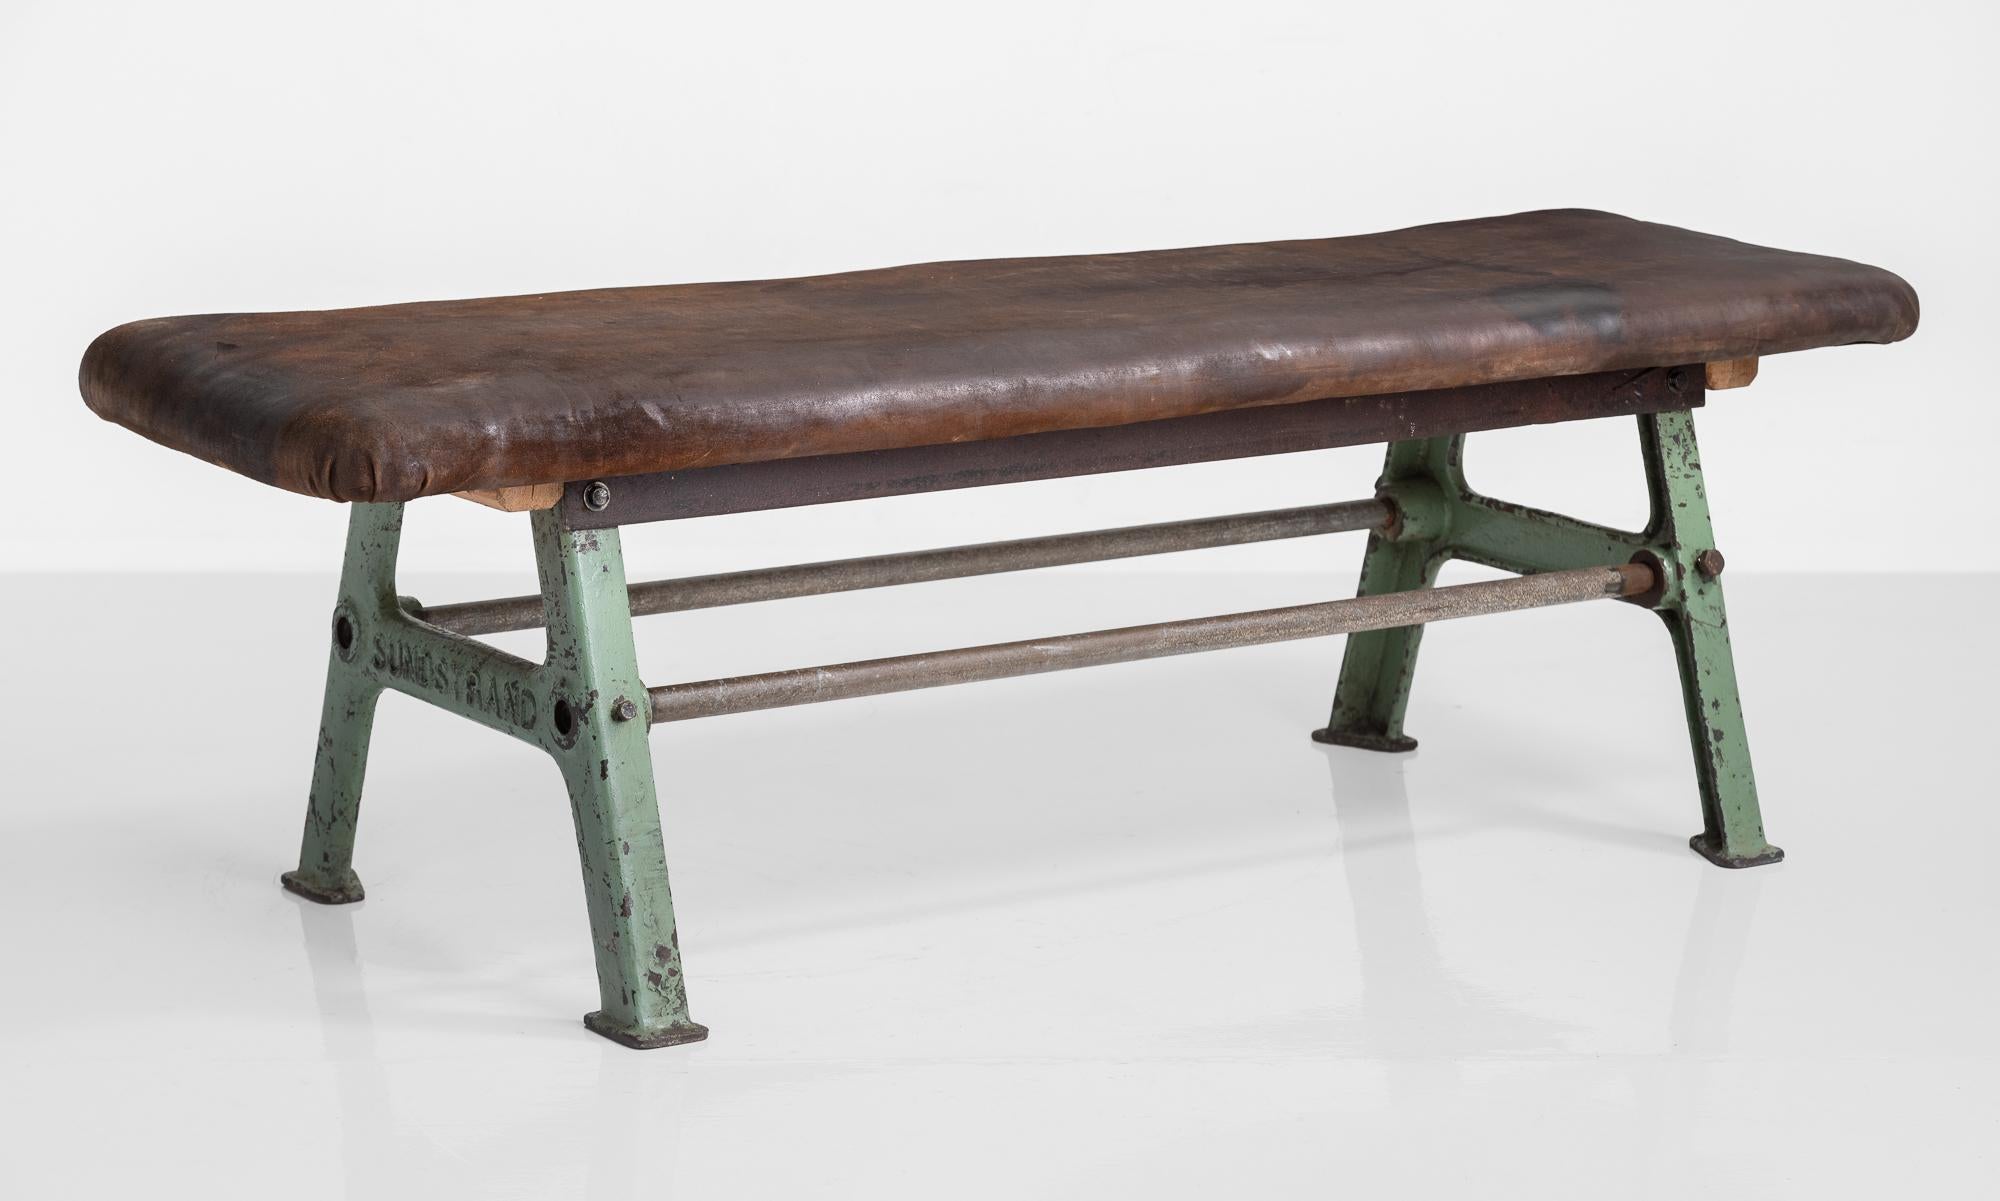 Leather top industrial bench, France, circa 1950.

Well worn leather top on industrial metal legs with tubular stretcher support.